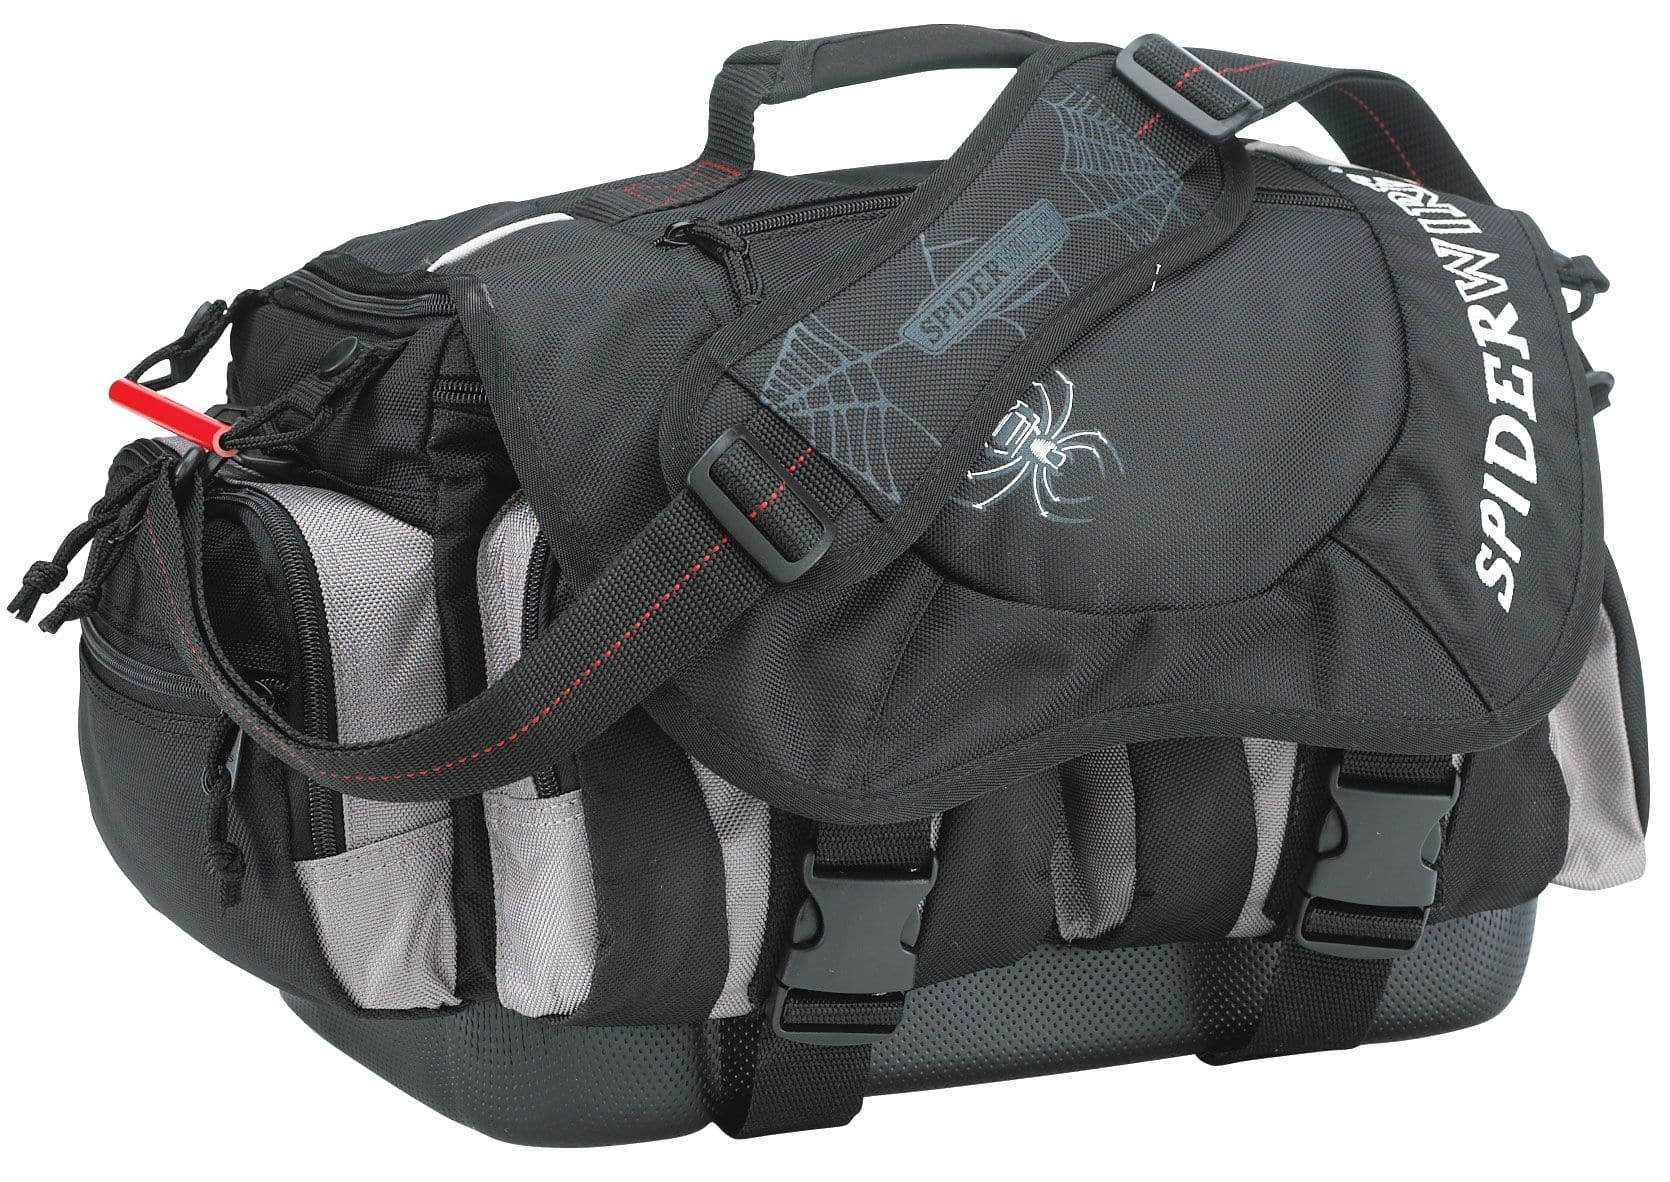 Spider Bag with Four Tackle Boxes